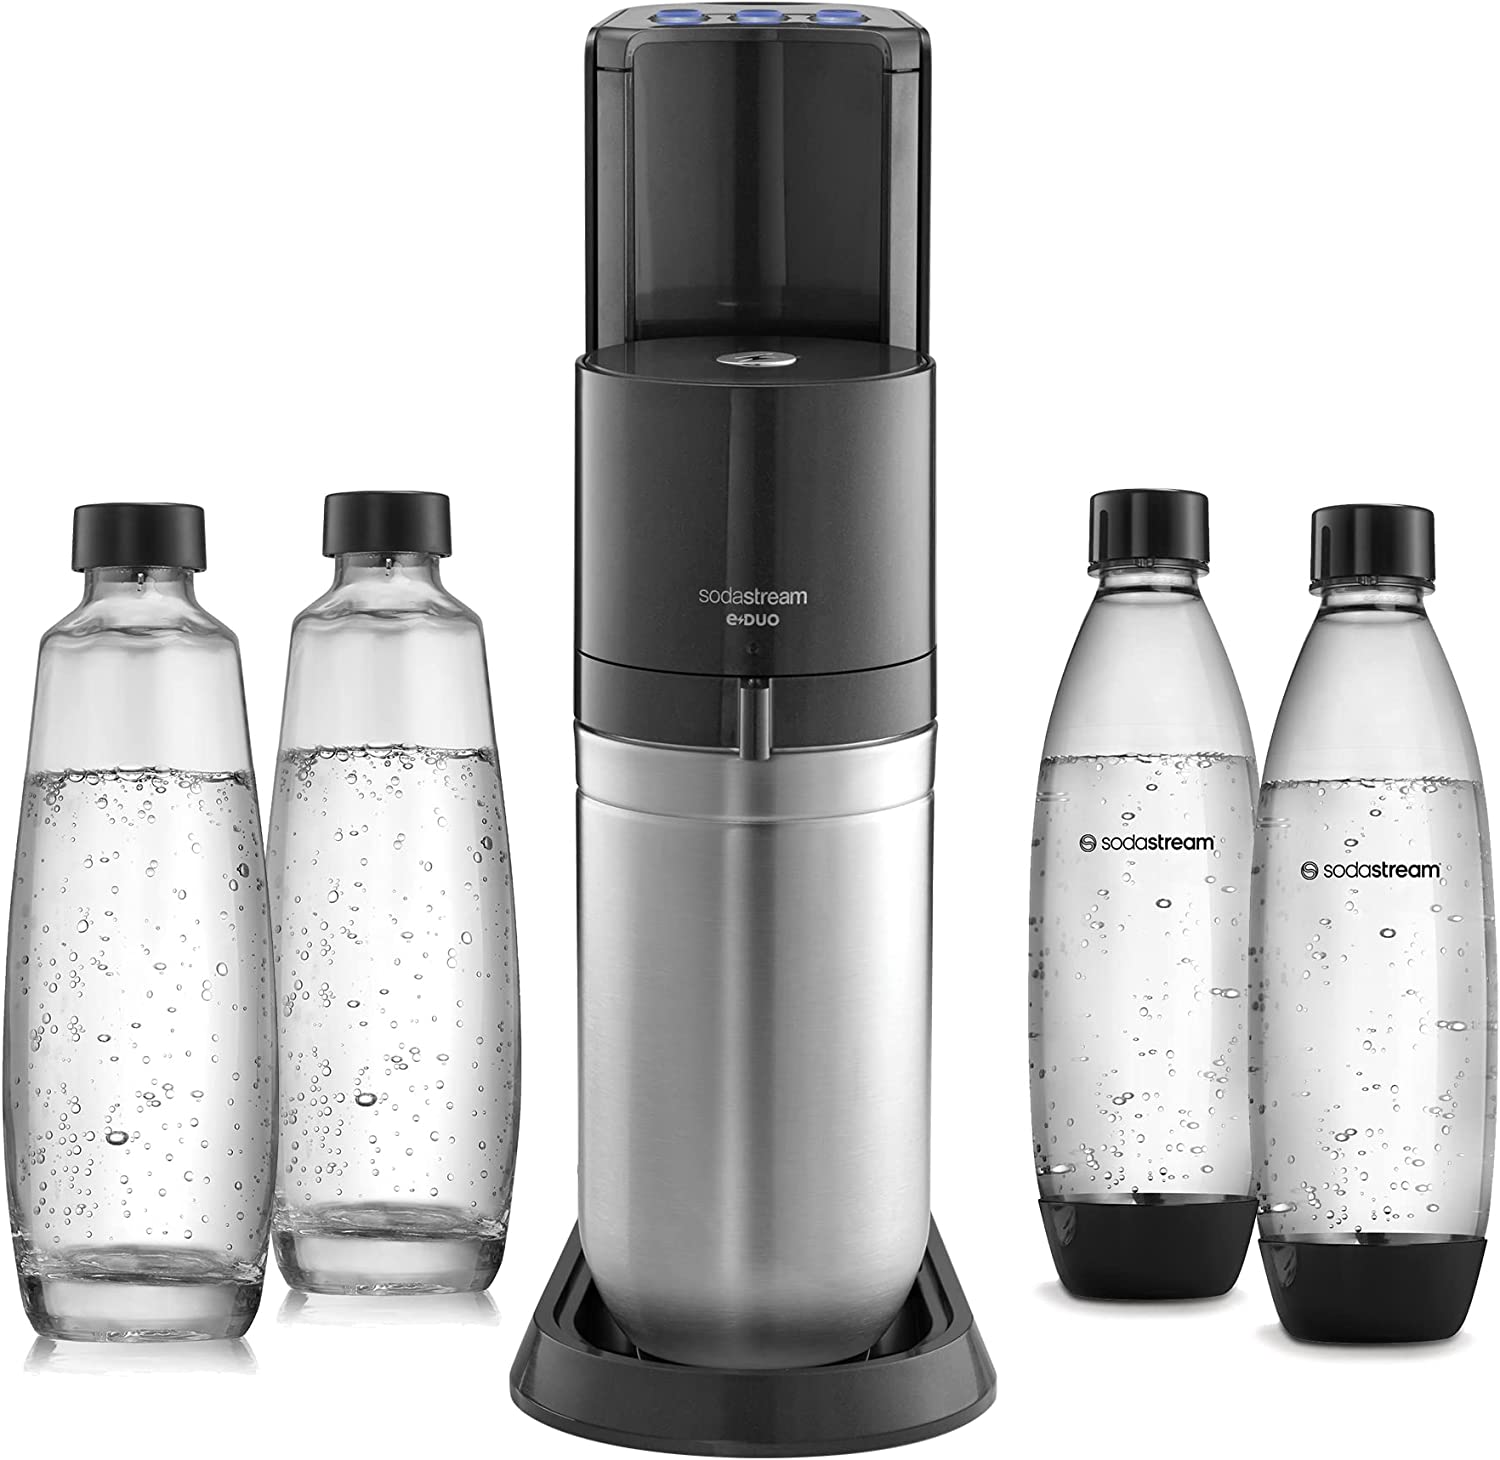 Sodastream E-duo Electric Water Carbonator With Co2 Cylinder, Glass Bottle and 2 x 1 Litre Dishwasher-Safe Plastic Bottles, Height: 44 cm, Color: Titanium